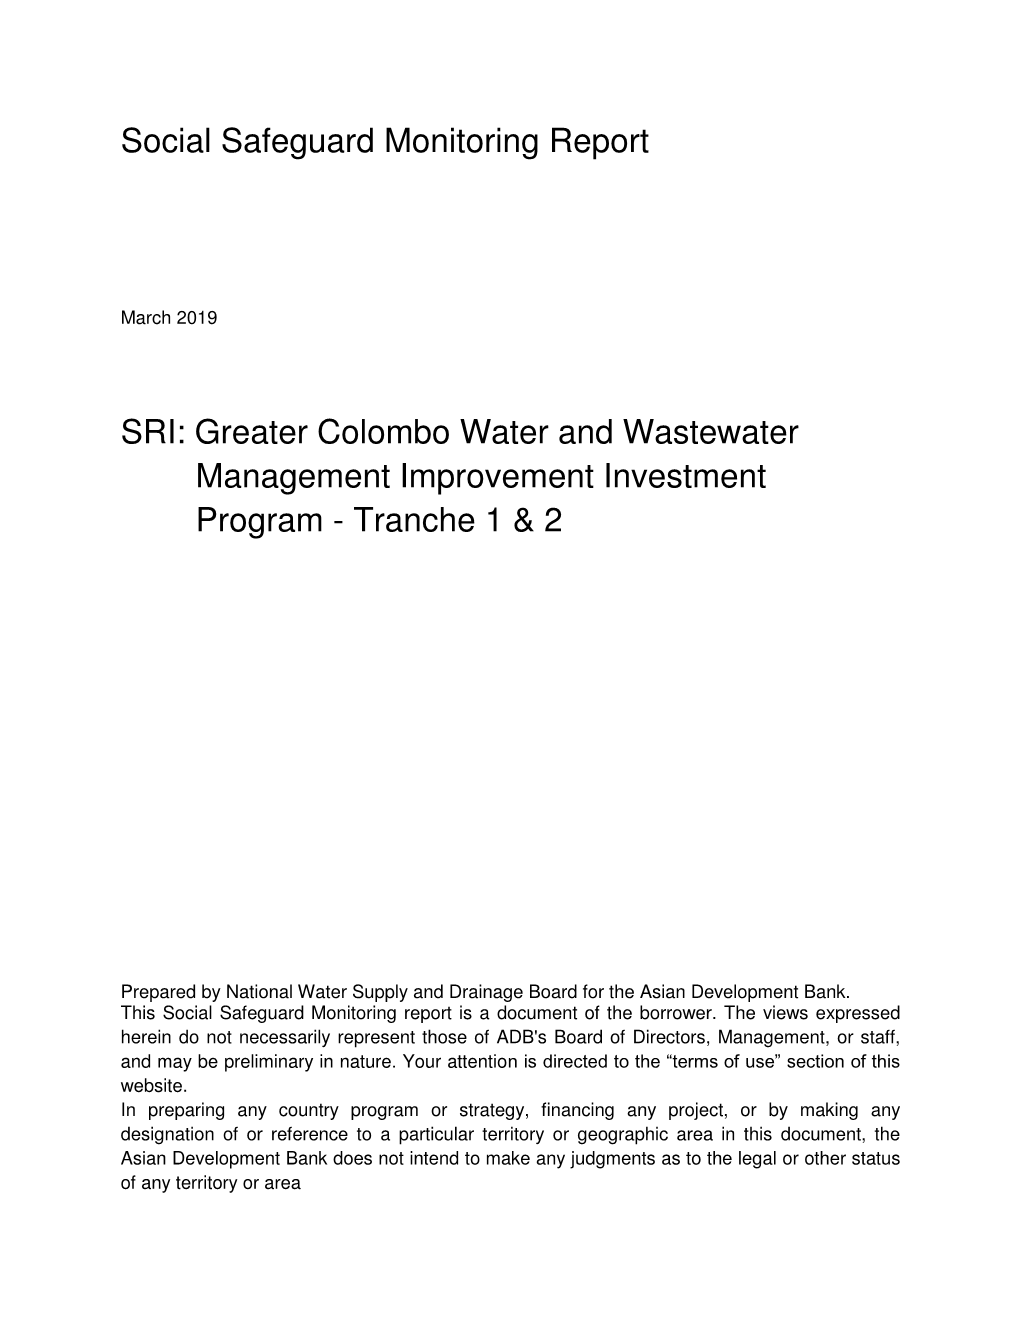 45148-005: Greater Colombo Water And